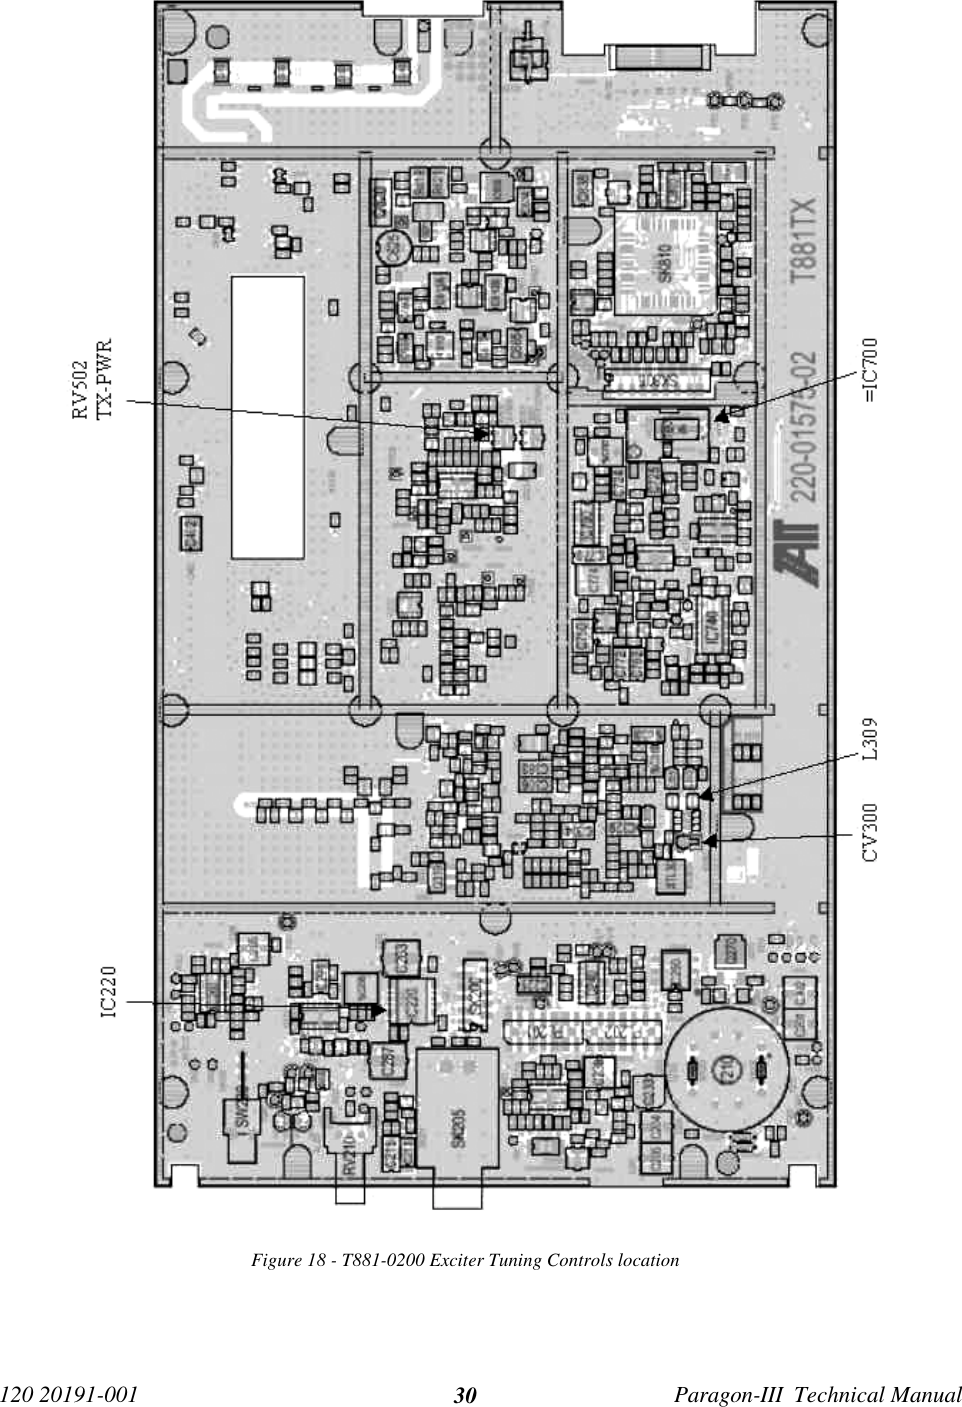 120 20191-001 Paragon-III  Technical Manual30Figure 18 - T881-0200 Exciter Tuning Controls location